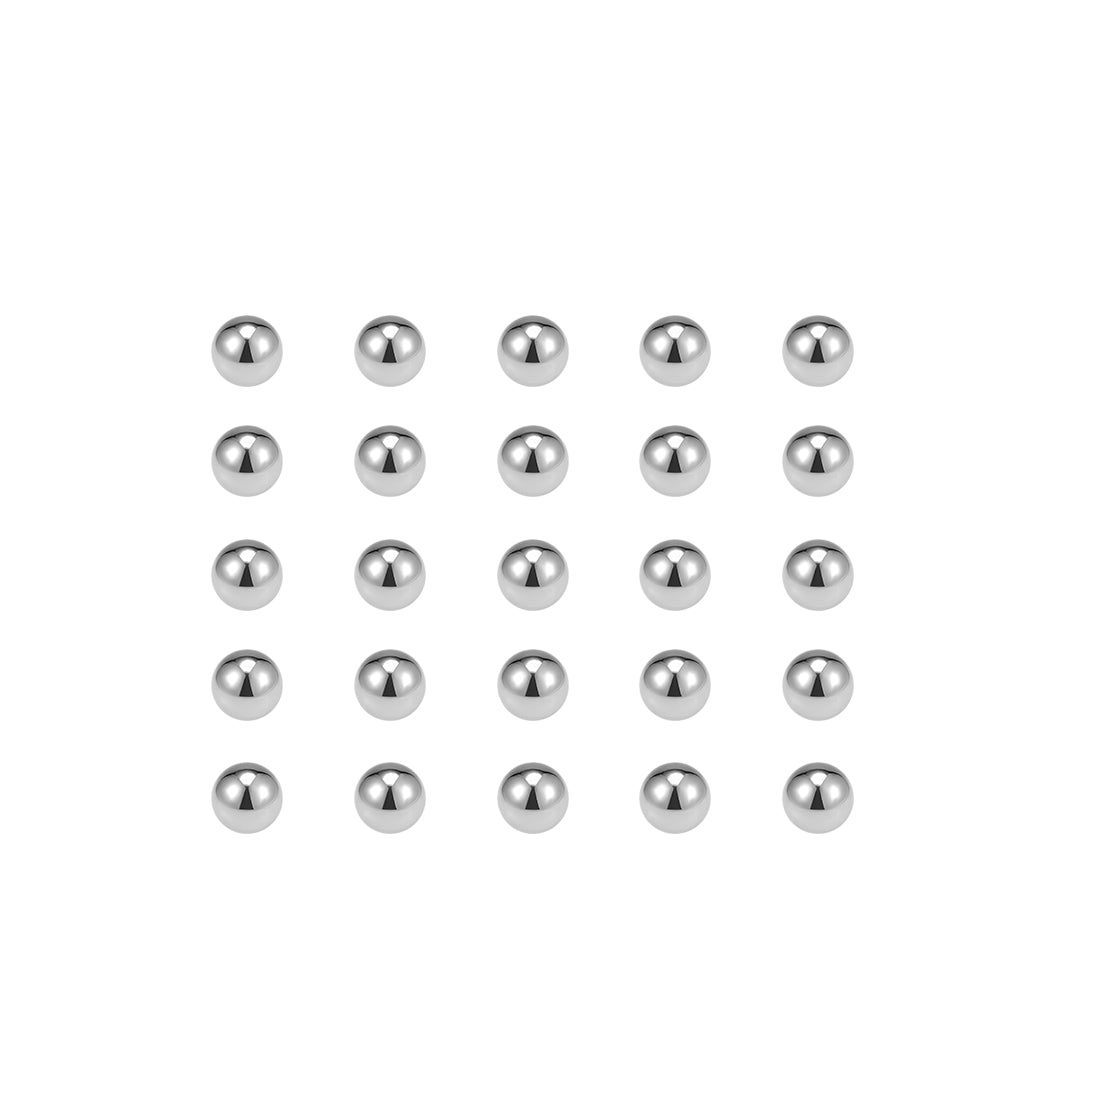 uxcell Uxcell Precision Balls 5/32" Solid Chrome Steel G25 for Ball Bearing Wheel 500pcs